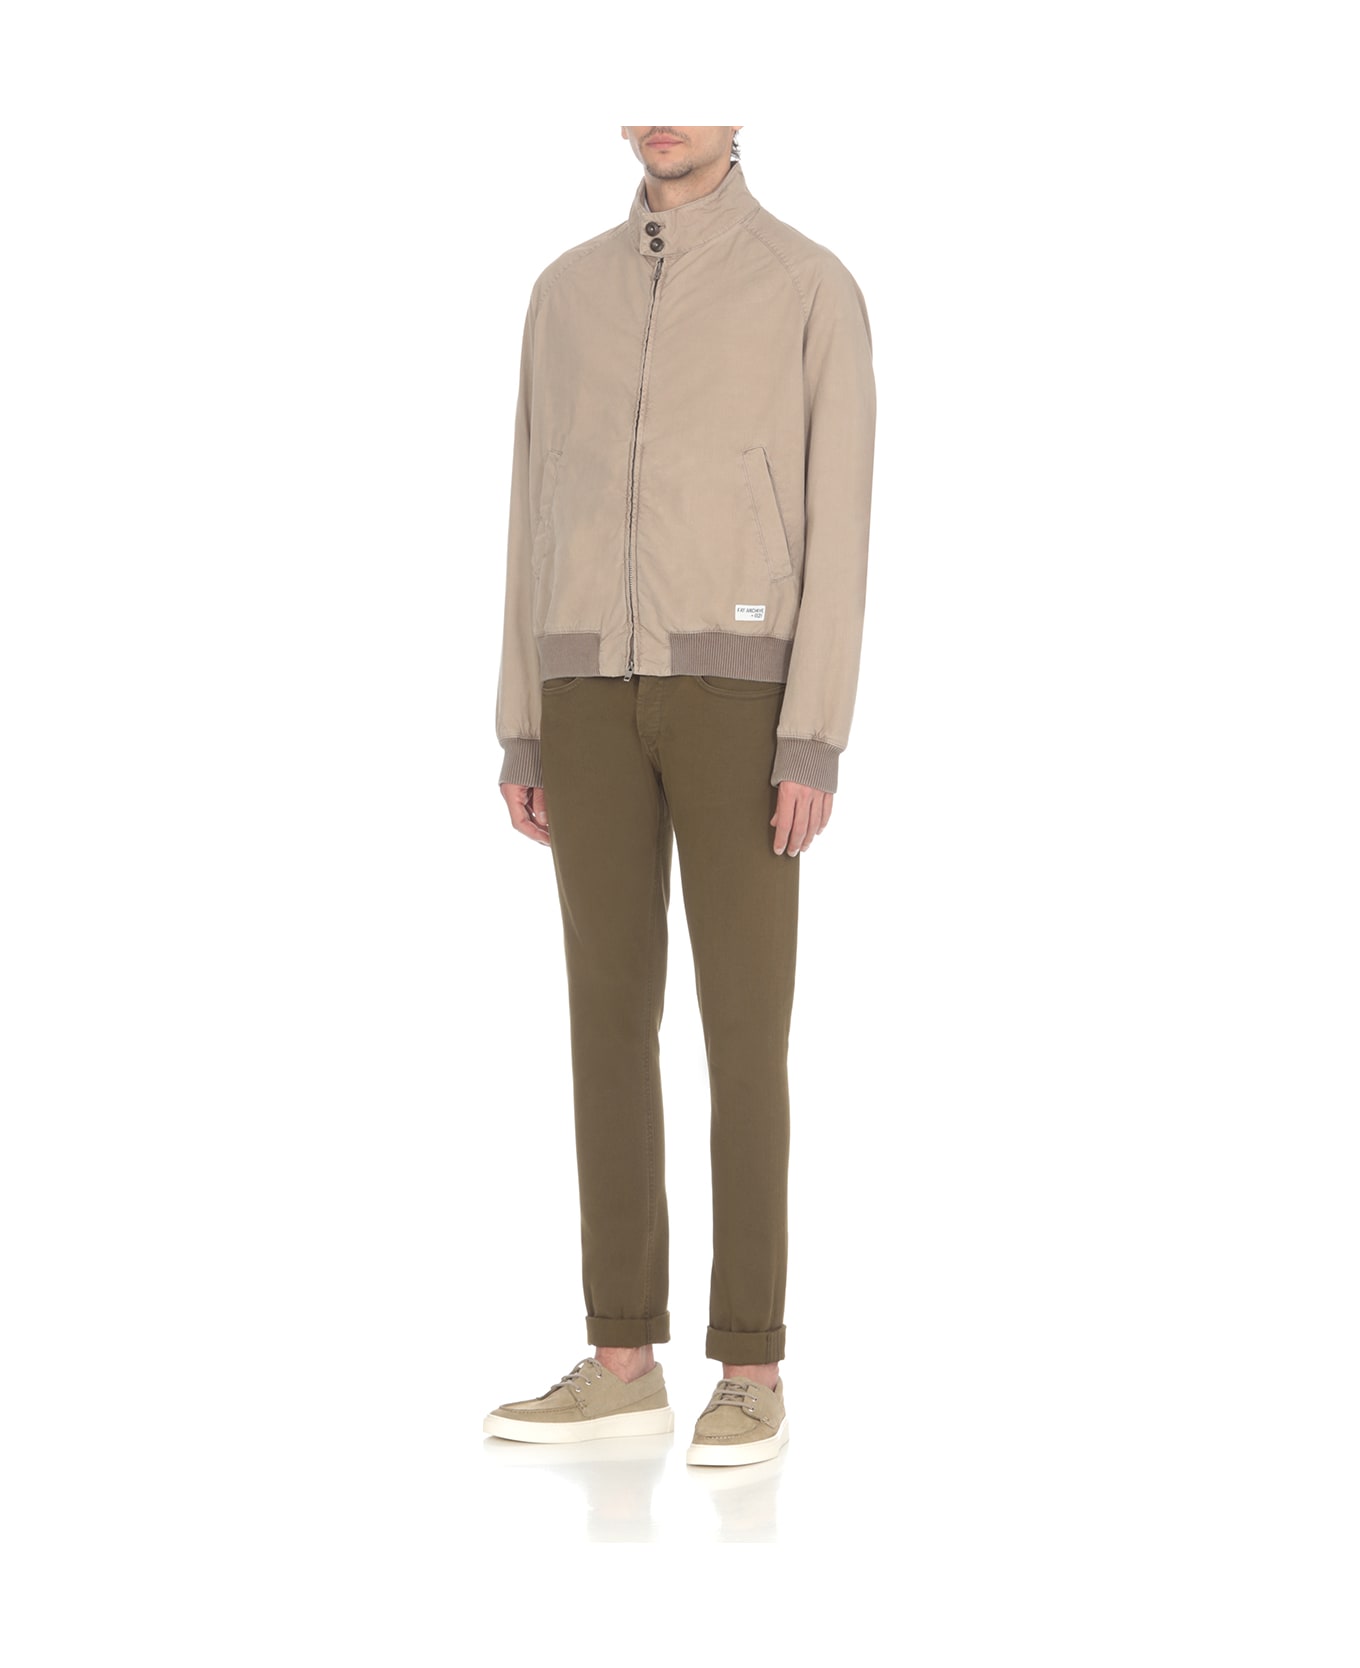 Fay Archive Bomber Jacket - Beige ブレザー